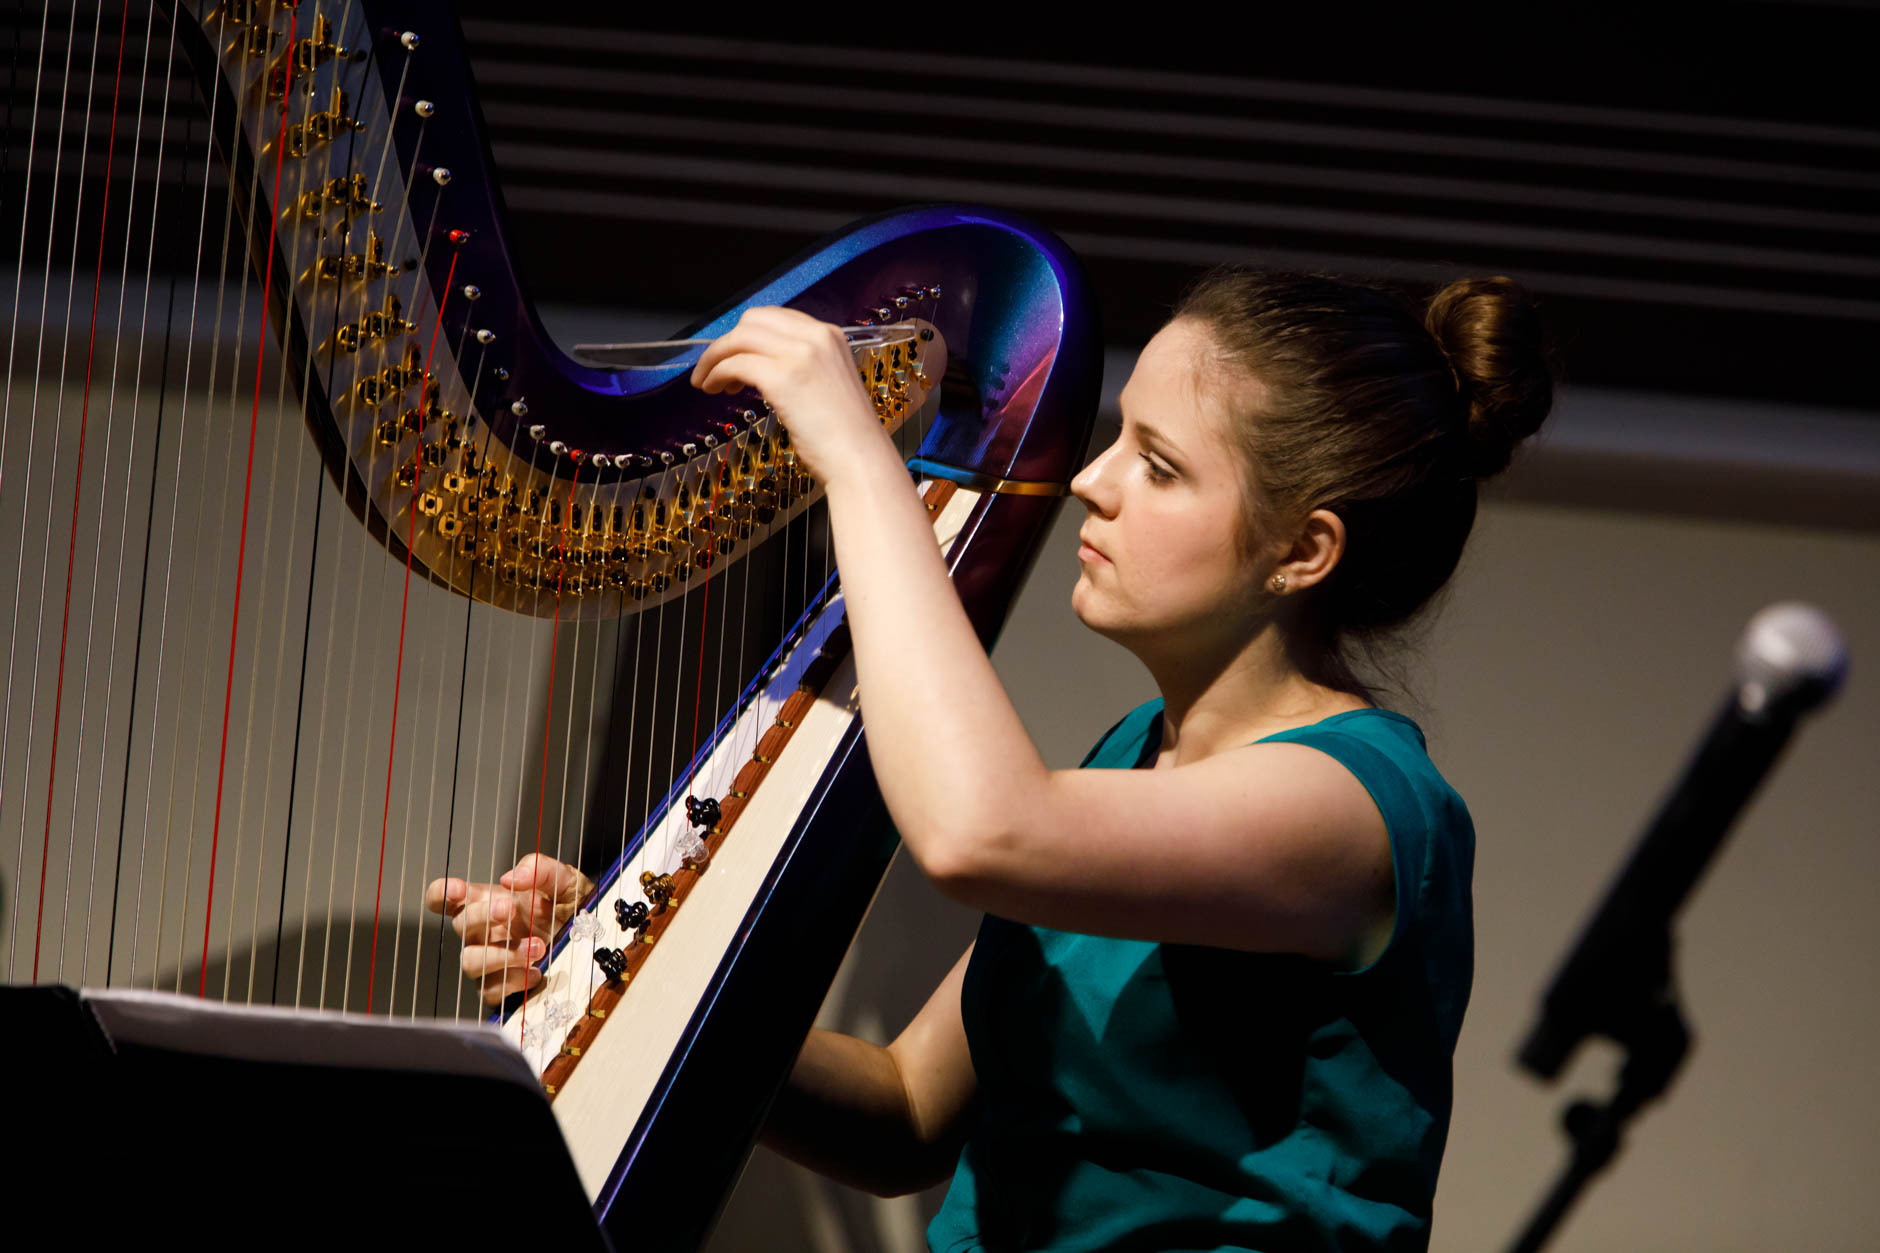 Harpist Sydney Campen performs during the Composition Forum at the 11th USA International Harp Competition at Indiana University in Bloomington, Indiana on Monday, July 8, 2019. (Photo by James Brosher)